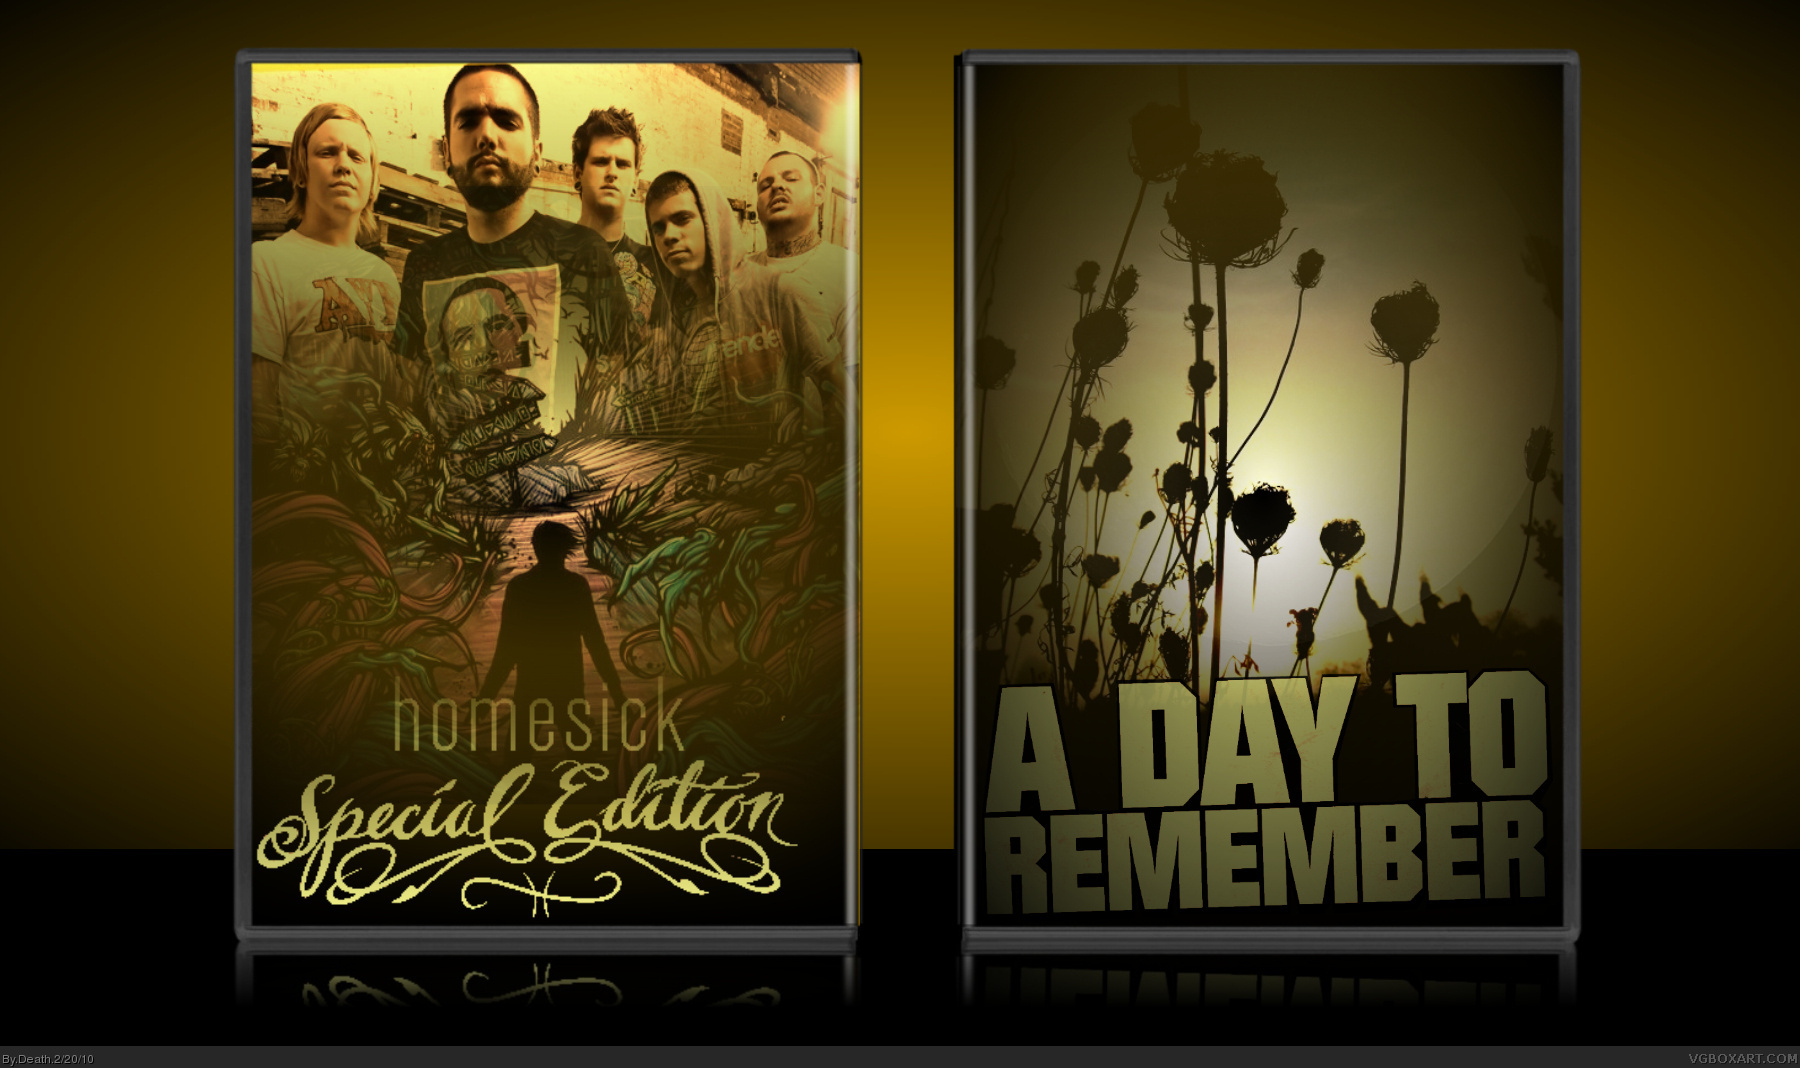 A Day To Remember: Homesick Special Edition box cover